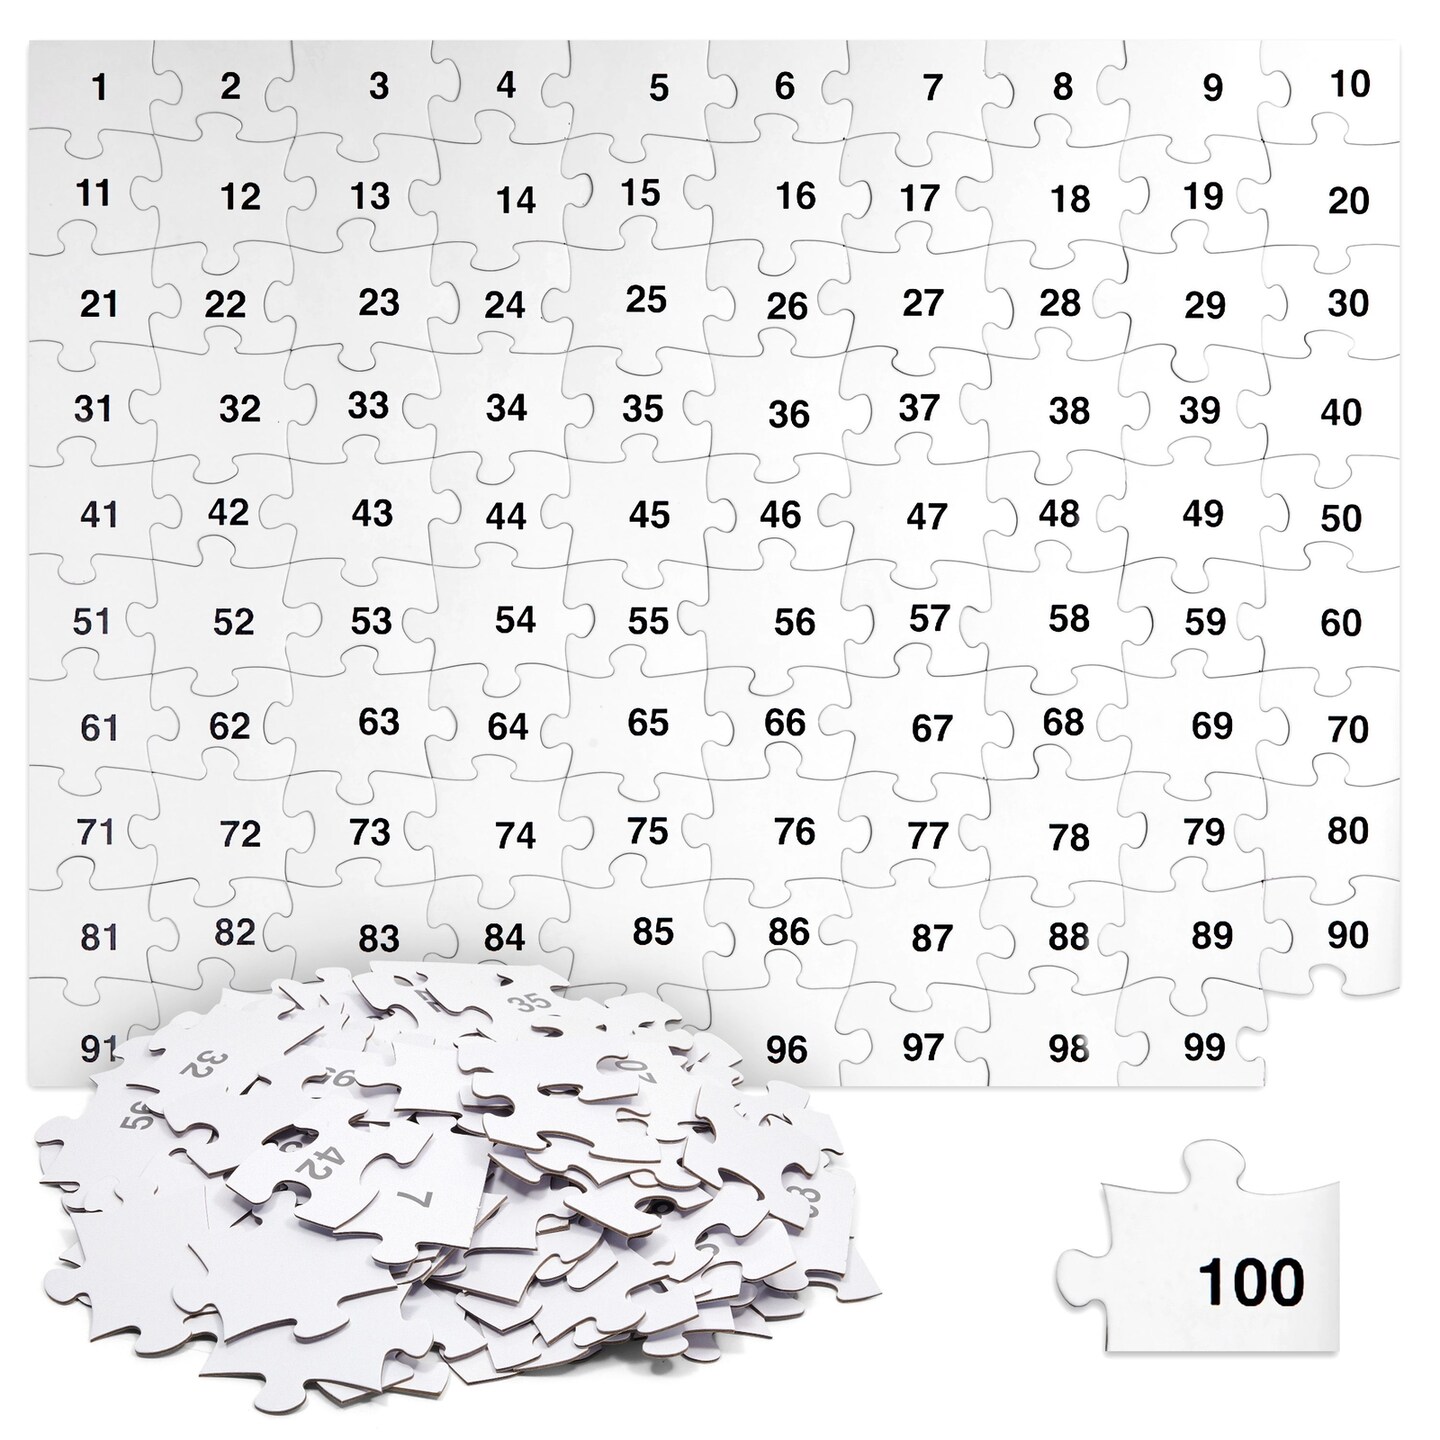 100-Piece DIY Make Your Own Jigsaw Puzzle Kit, Bulk Large Blank Puzzles to  Draw on for Guest Book, Wedding, Party, Anniversary, Kids Birthday, School,  Classroom, Arts and Crafts (27x36 in)